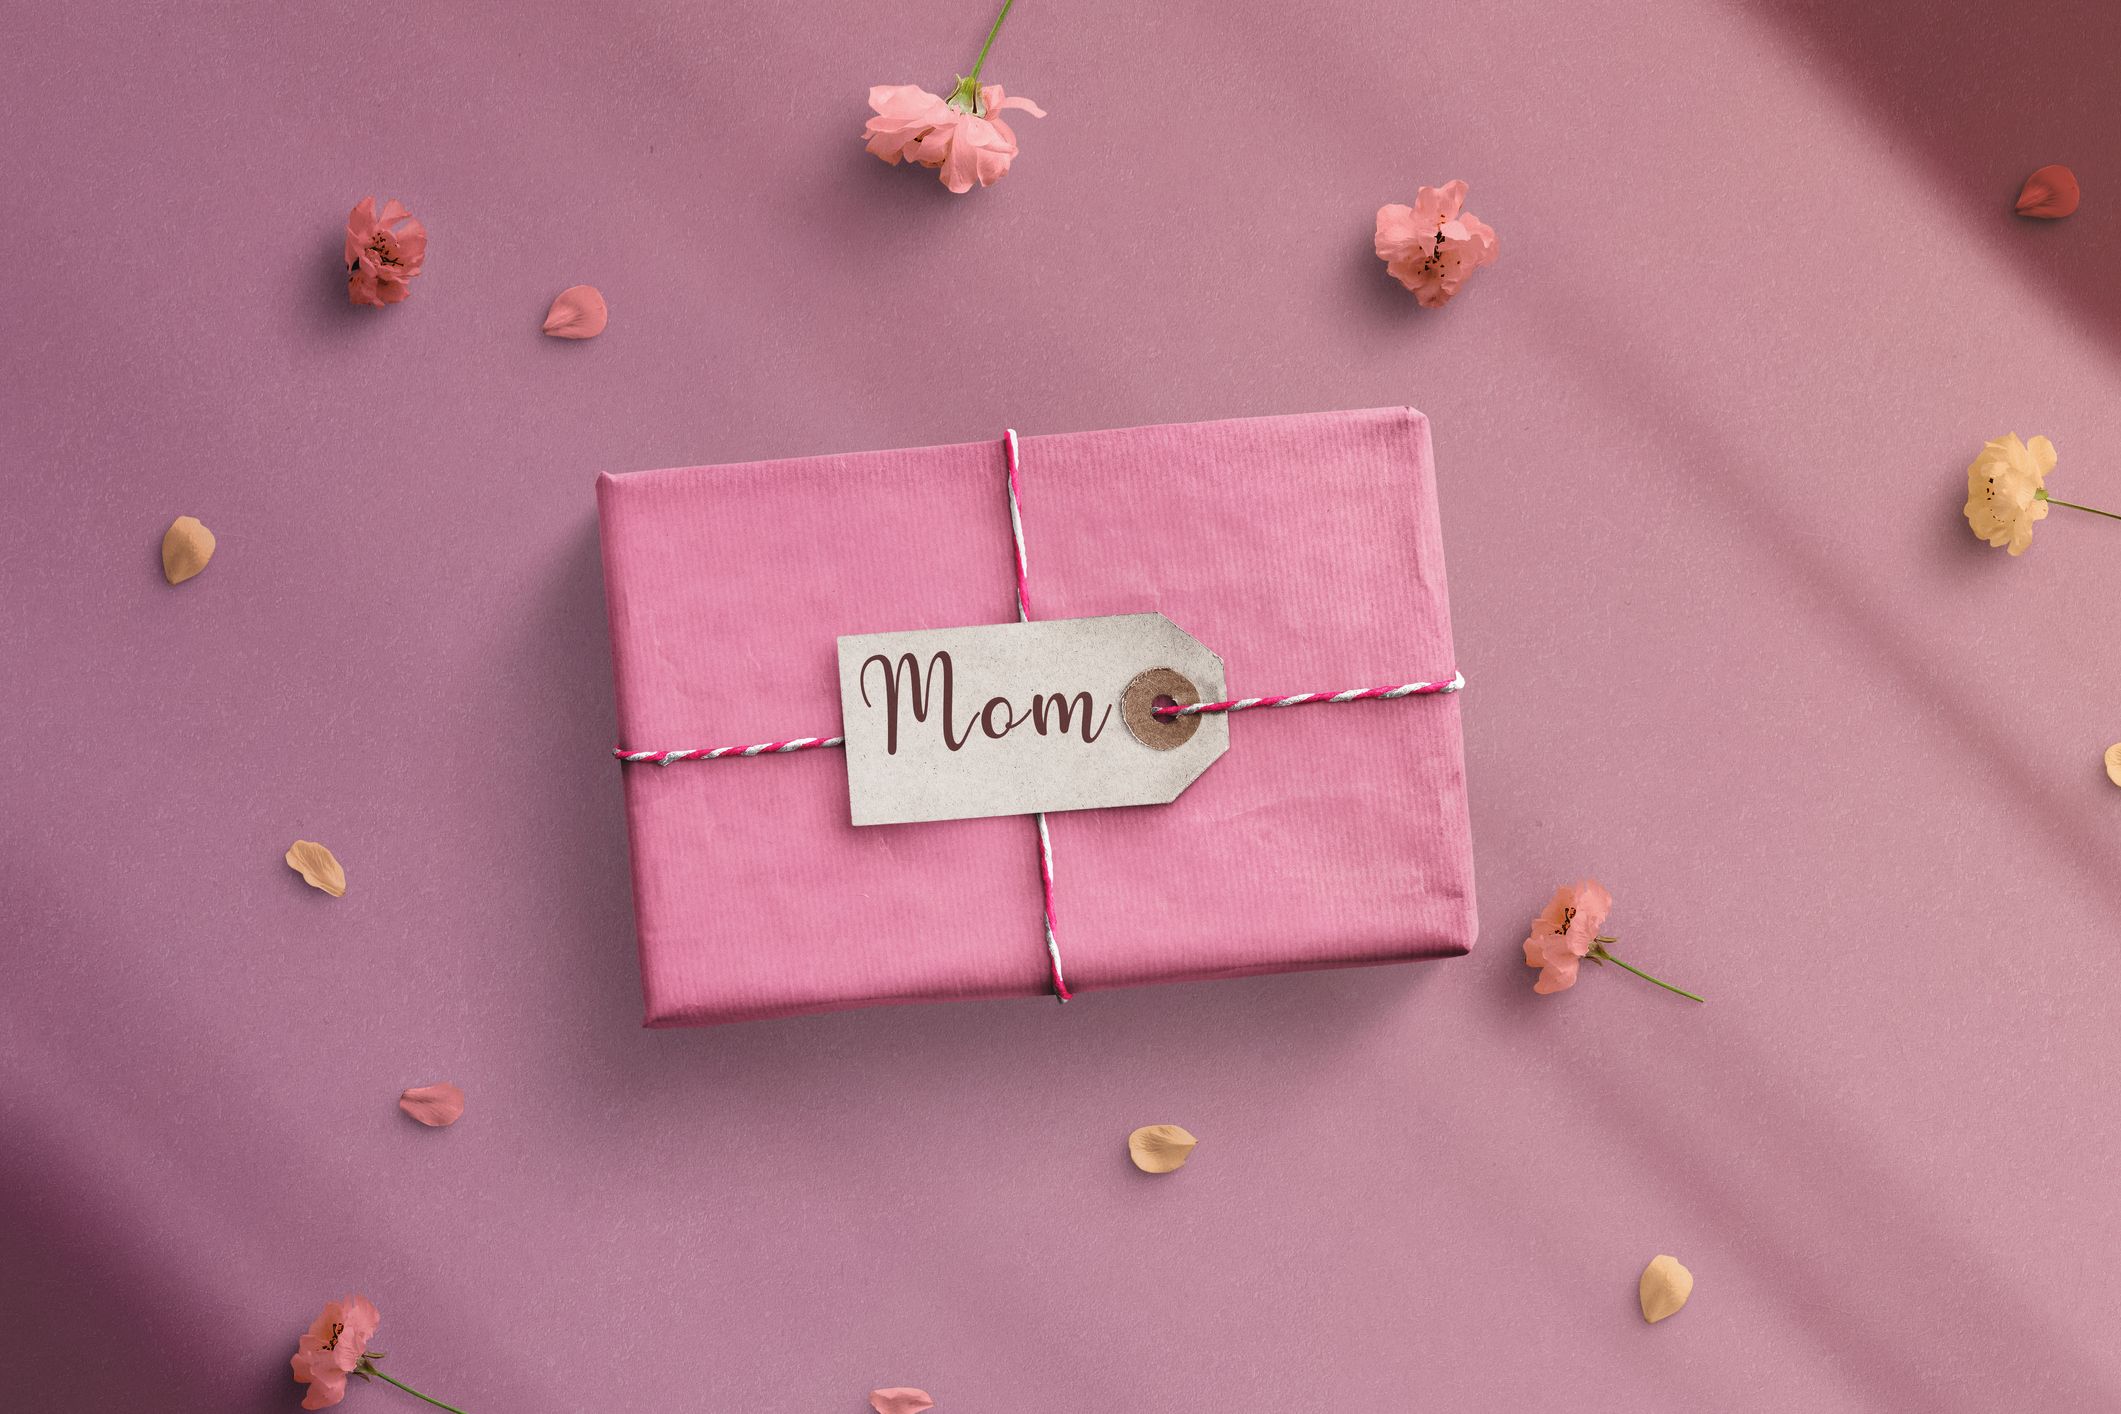 Moms Are Vocal About What They Want for Mother's Day, Study Says